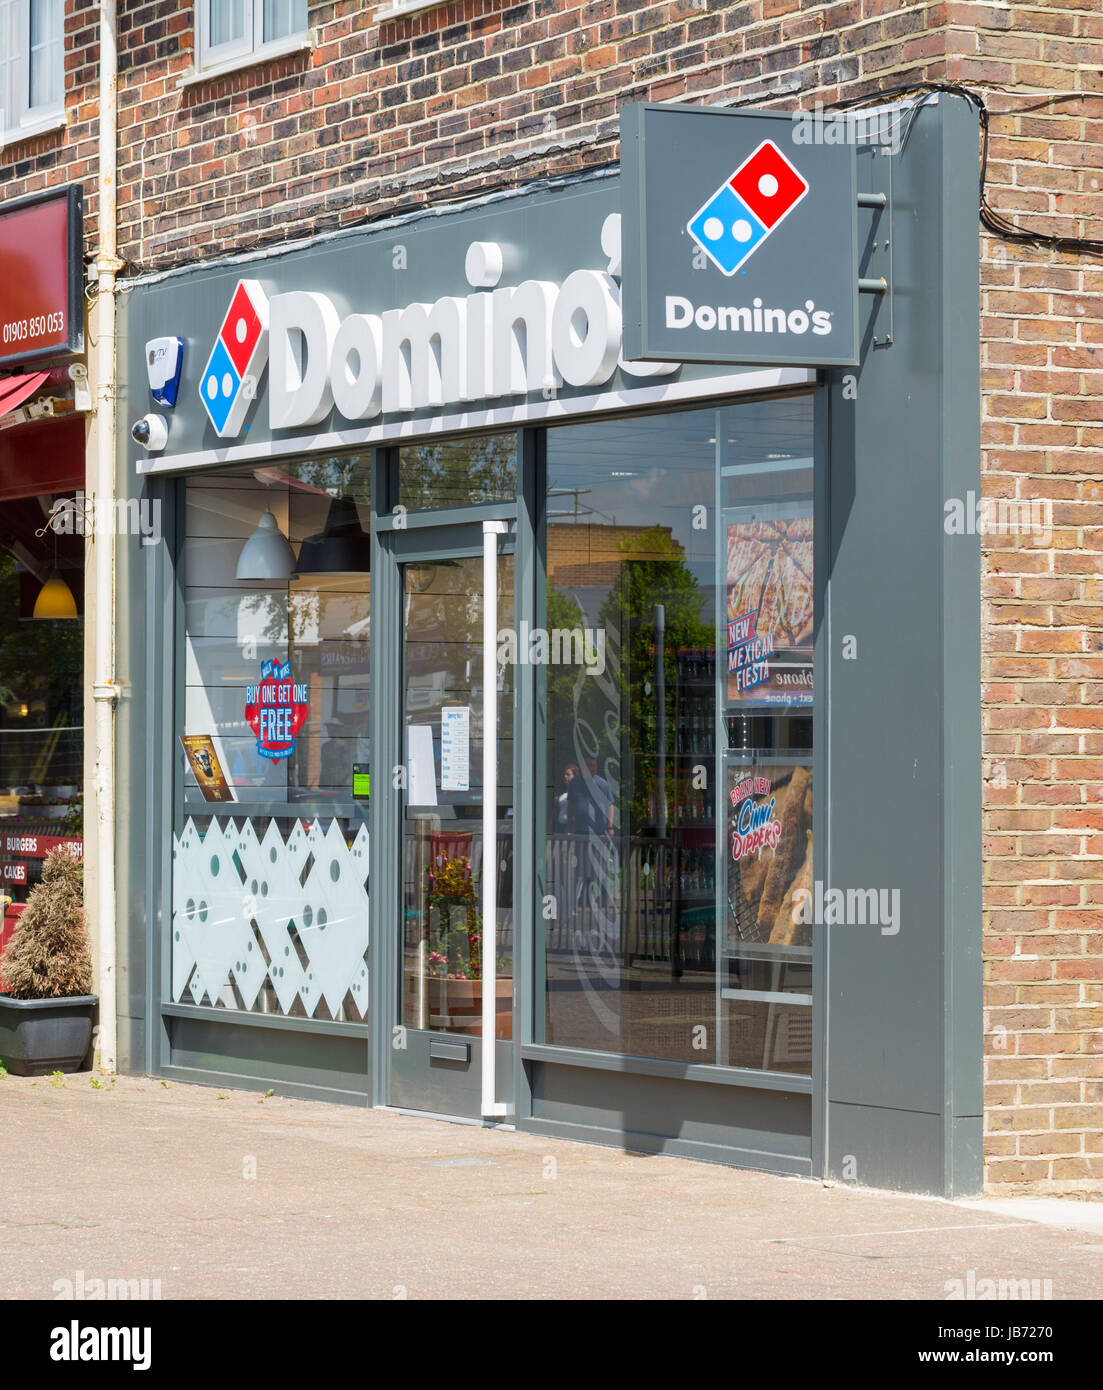 Domino's pizza shop front in the UK Stock Photo - Alamy